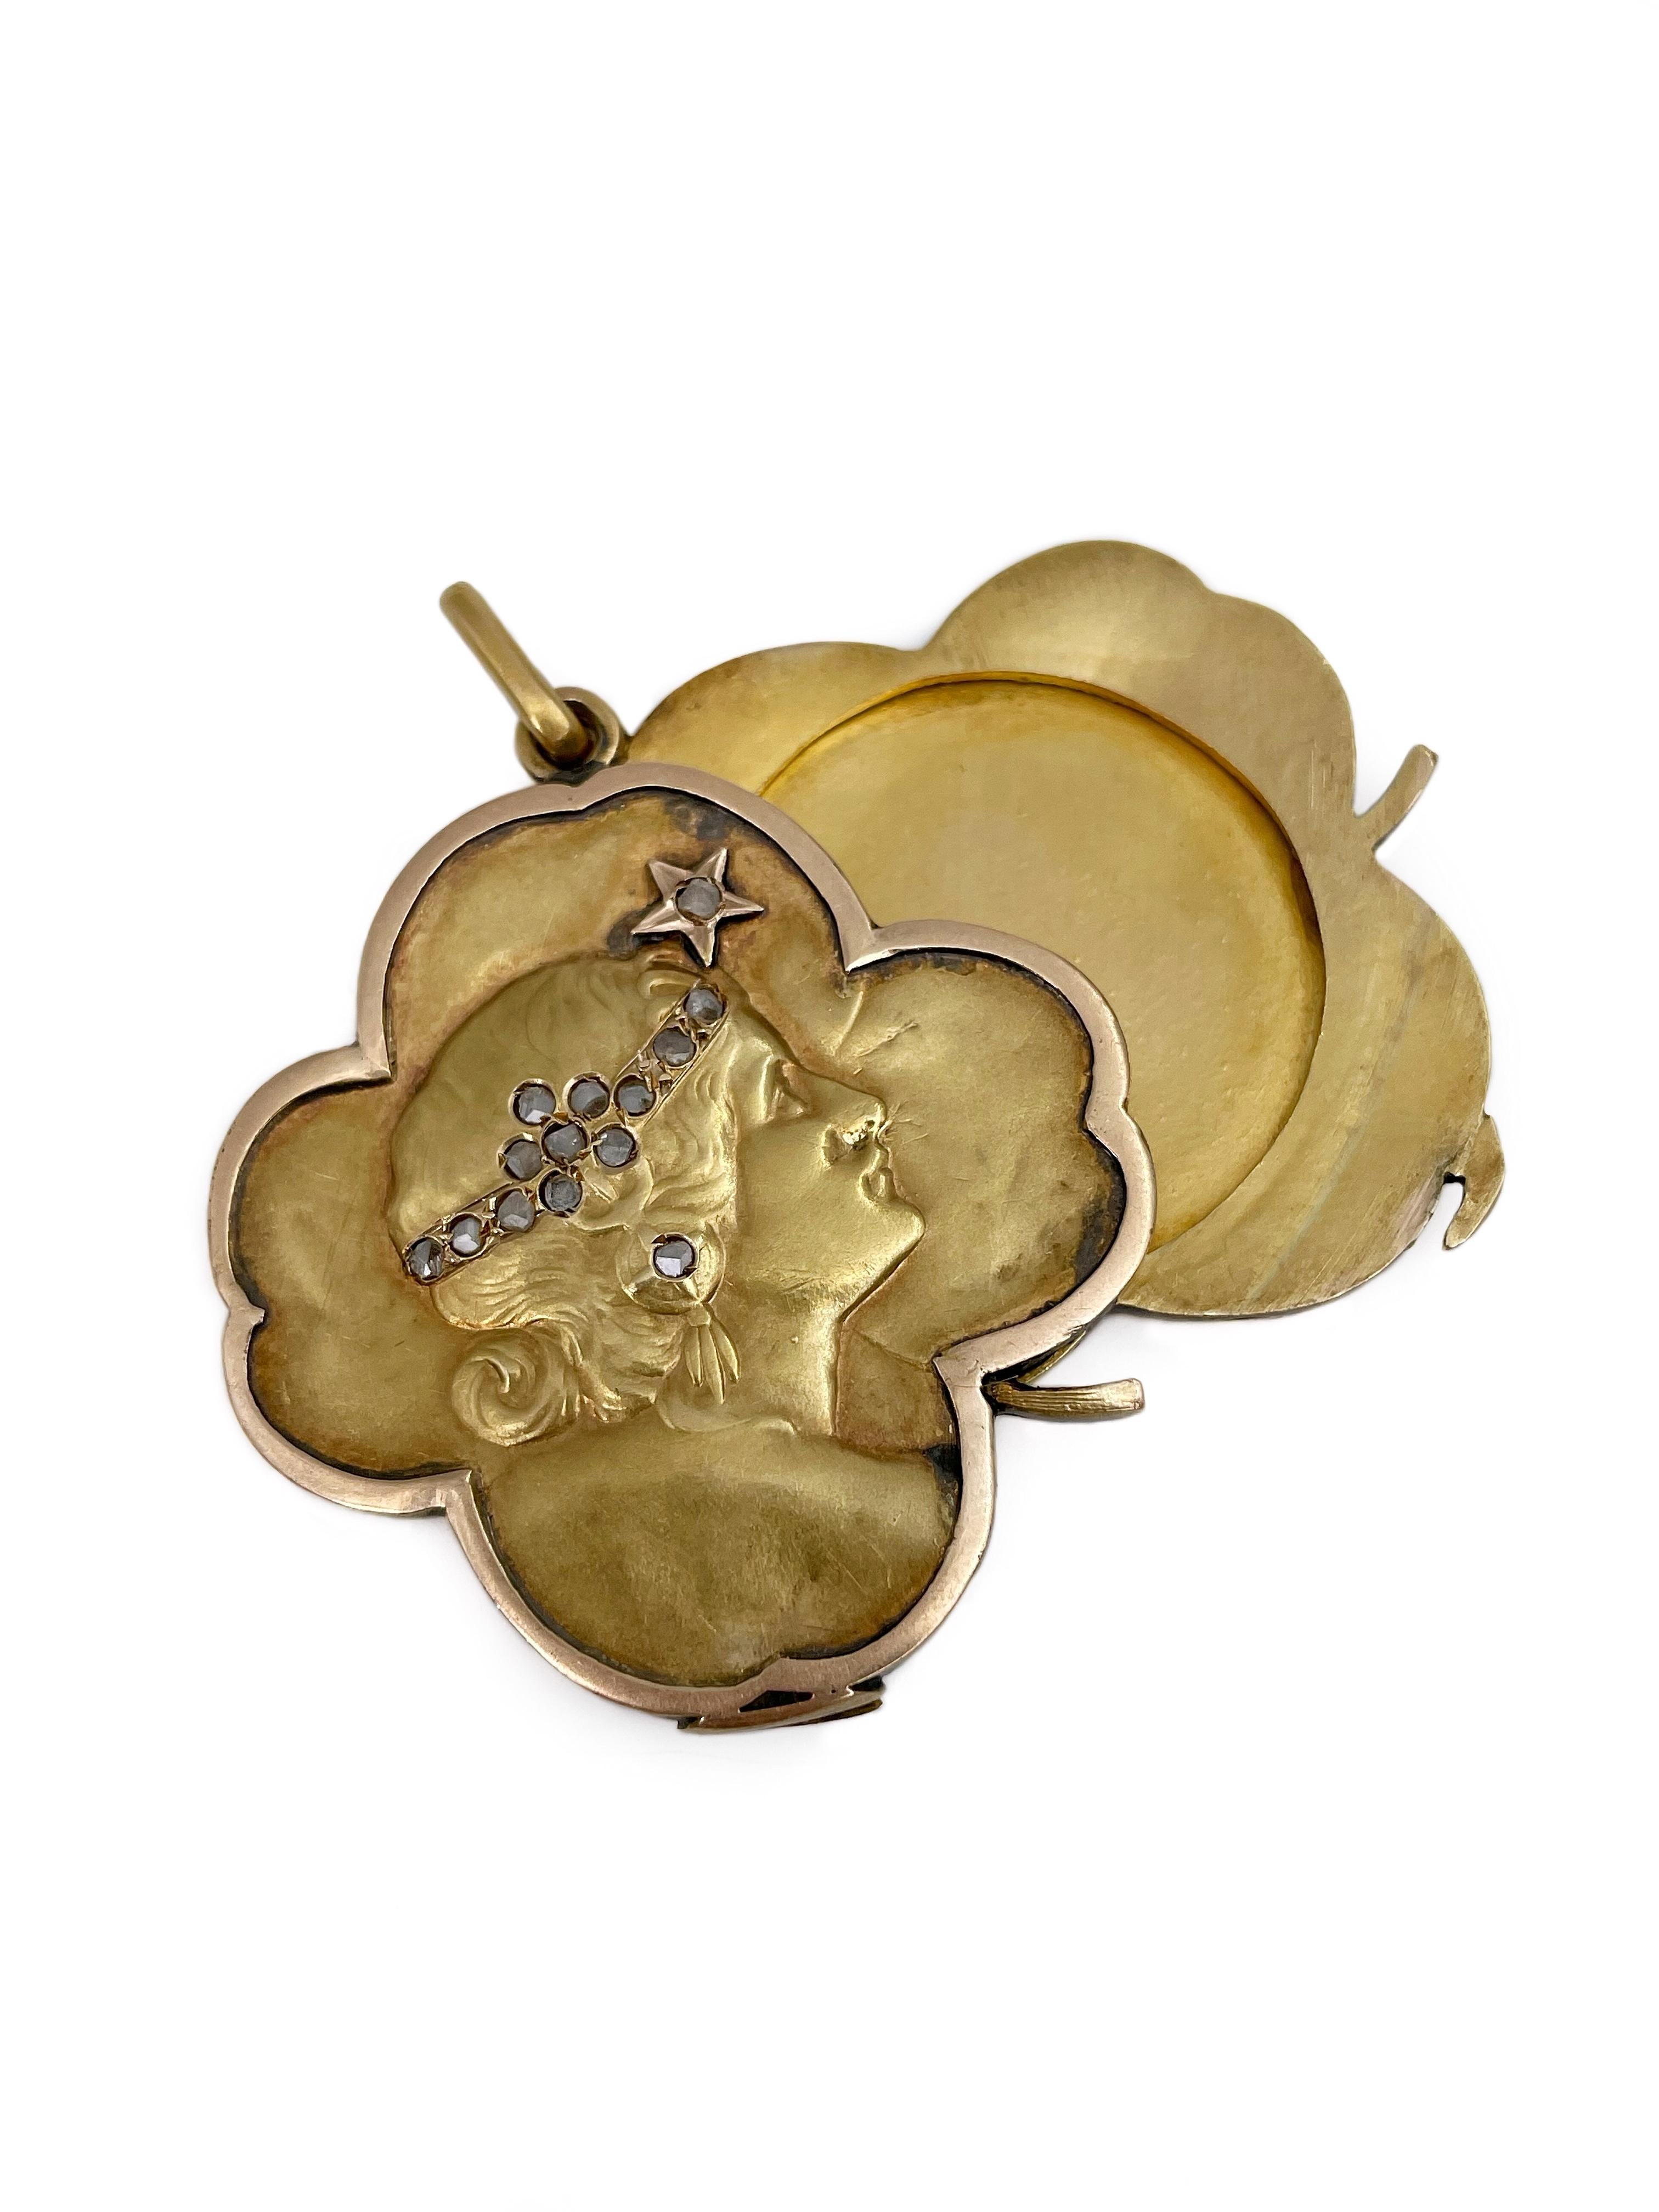 This is an amazing Art Nouveau locket pendant in a shape of a four-leaf clover. The piece is crafted in 14K yellow gold. It depicts a glamorous lady with a hairband and an earring encrusted with 14 rose cut diamonds.

It has some minor scratches.